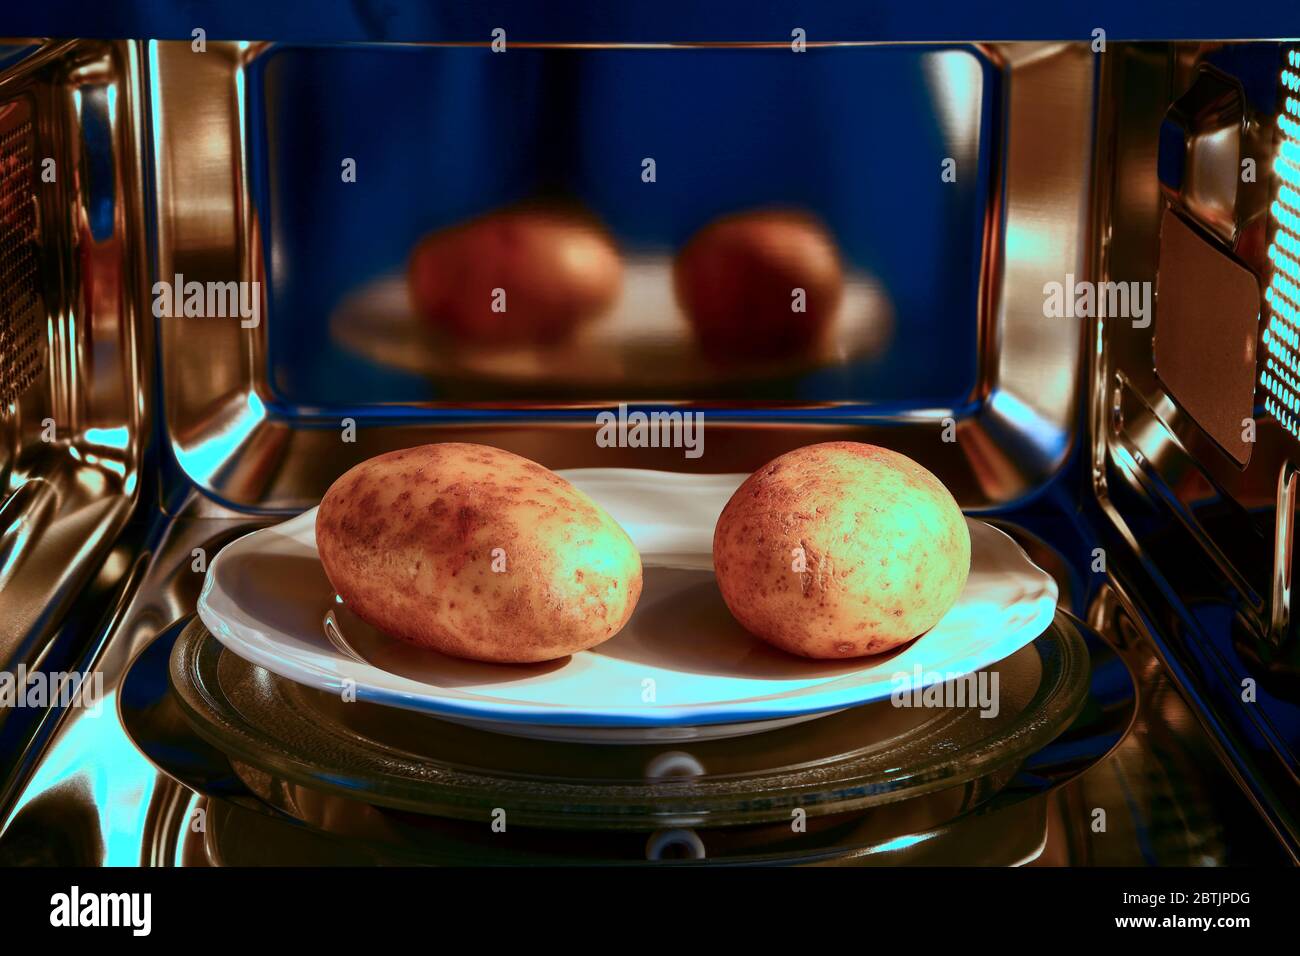 Two baked potatoes ready to cook in a microwave oven Stock Photo